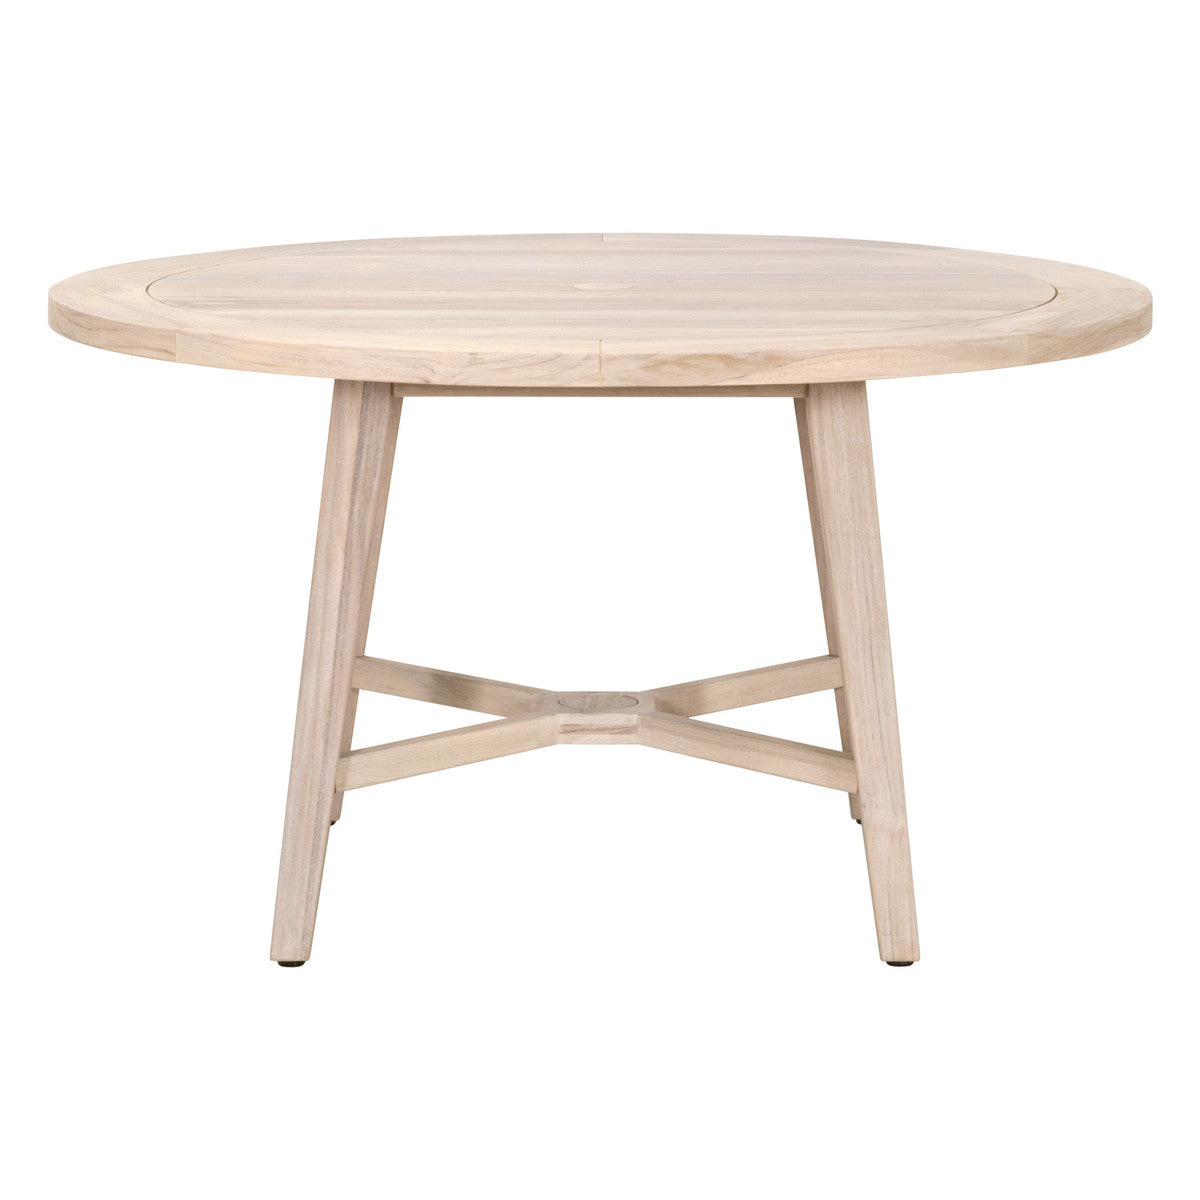 Carmel Outdoor 54" Round Dining Table in Gray Teak - 6825-RD.GT